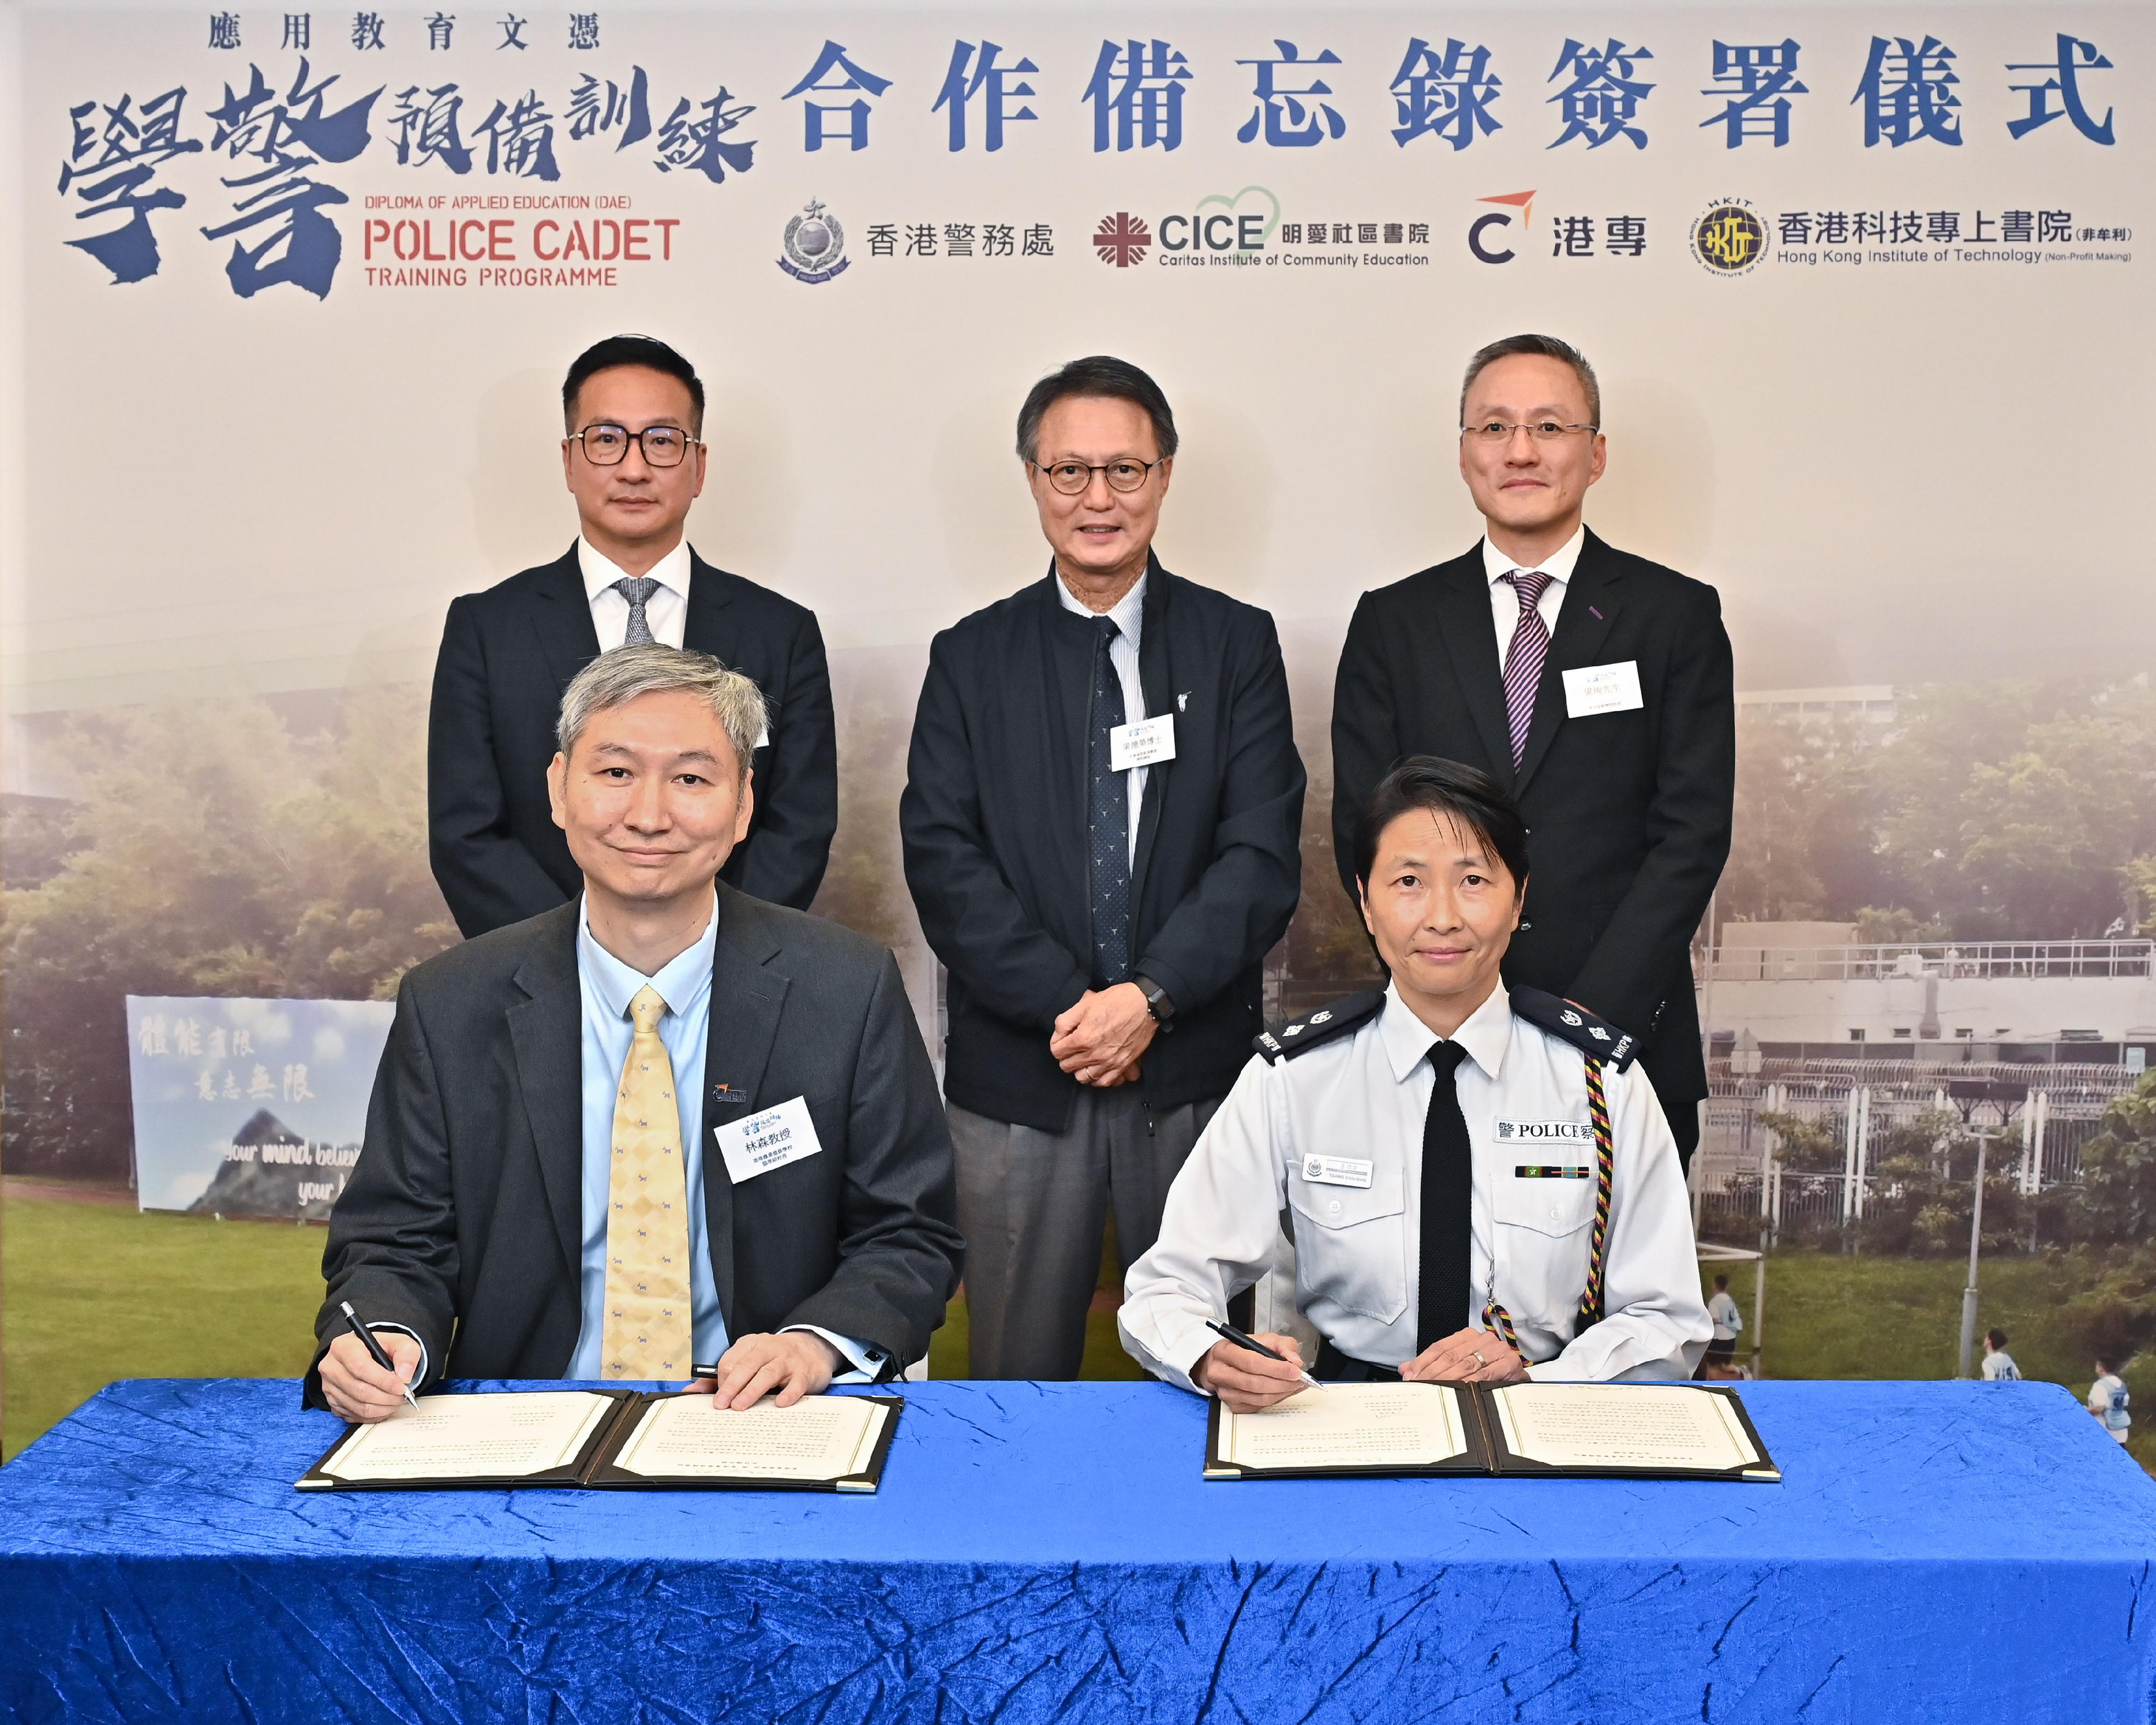 The Hong Kong Police College announced today (January 19) that it will co-organise the “Diploma of Applied Education - Police Cadet Training” Programme with Caritas Institute of Community Education, Hong Kong College of Technology (HKCT) and Hong Kong Institute of Technology in the 2024/25 academic year. Witnessed by the Assistant Commissioner of Police (Personnel), Mr Chan Man-tak (back row, first left); Acting Director of the Hong Kong Police College, Mr Leung Shun (back row, first right); and Programme Director of Diploma of Applied Education of the Federation for Self-financing Tertiary Education, Dr Simon Leung (back row, centre), the Senior Superintendent of Police, School of Foundation Training, Ms Tsang Chiu-tong (front row, right), signed the Memorandum of Understanding with the Associate Vice President of HKCT, Professor Sam Lam (front row, left).